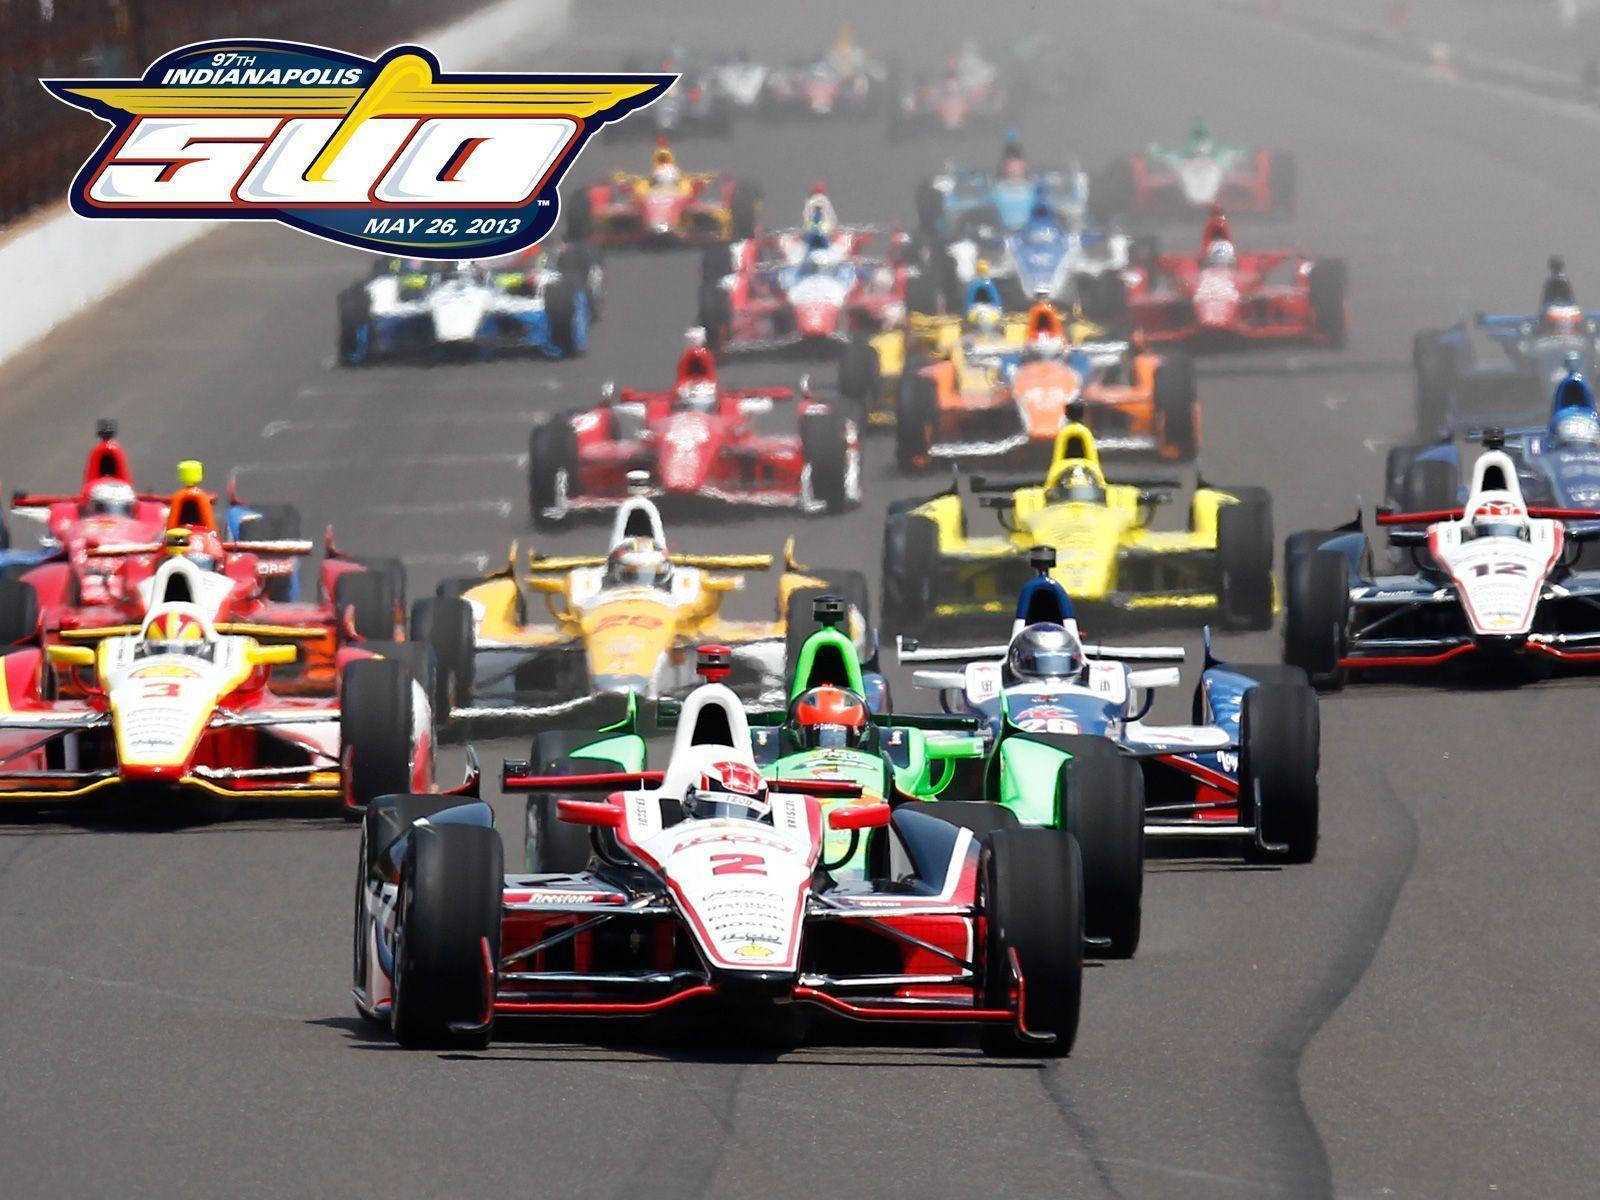 Caption: High-octane Action At The 97th Indianapolis 500 Auto Racing Background